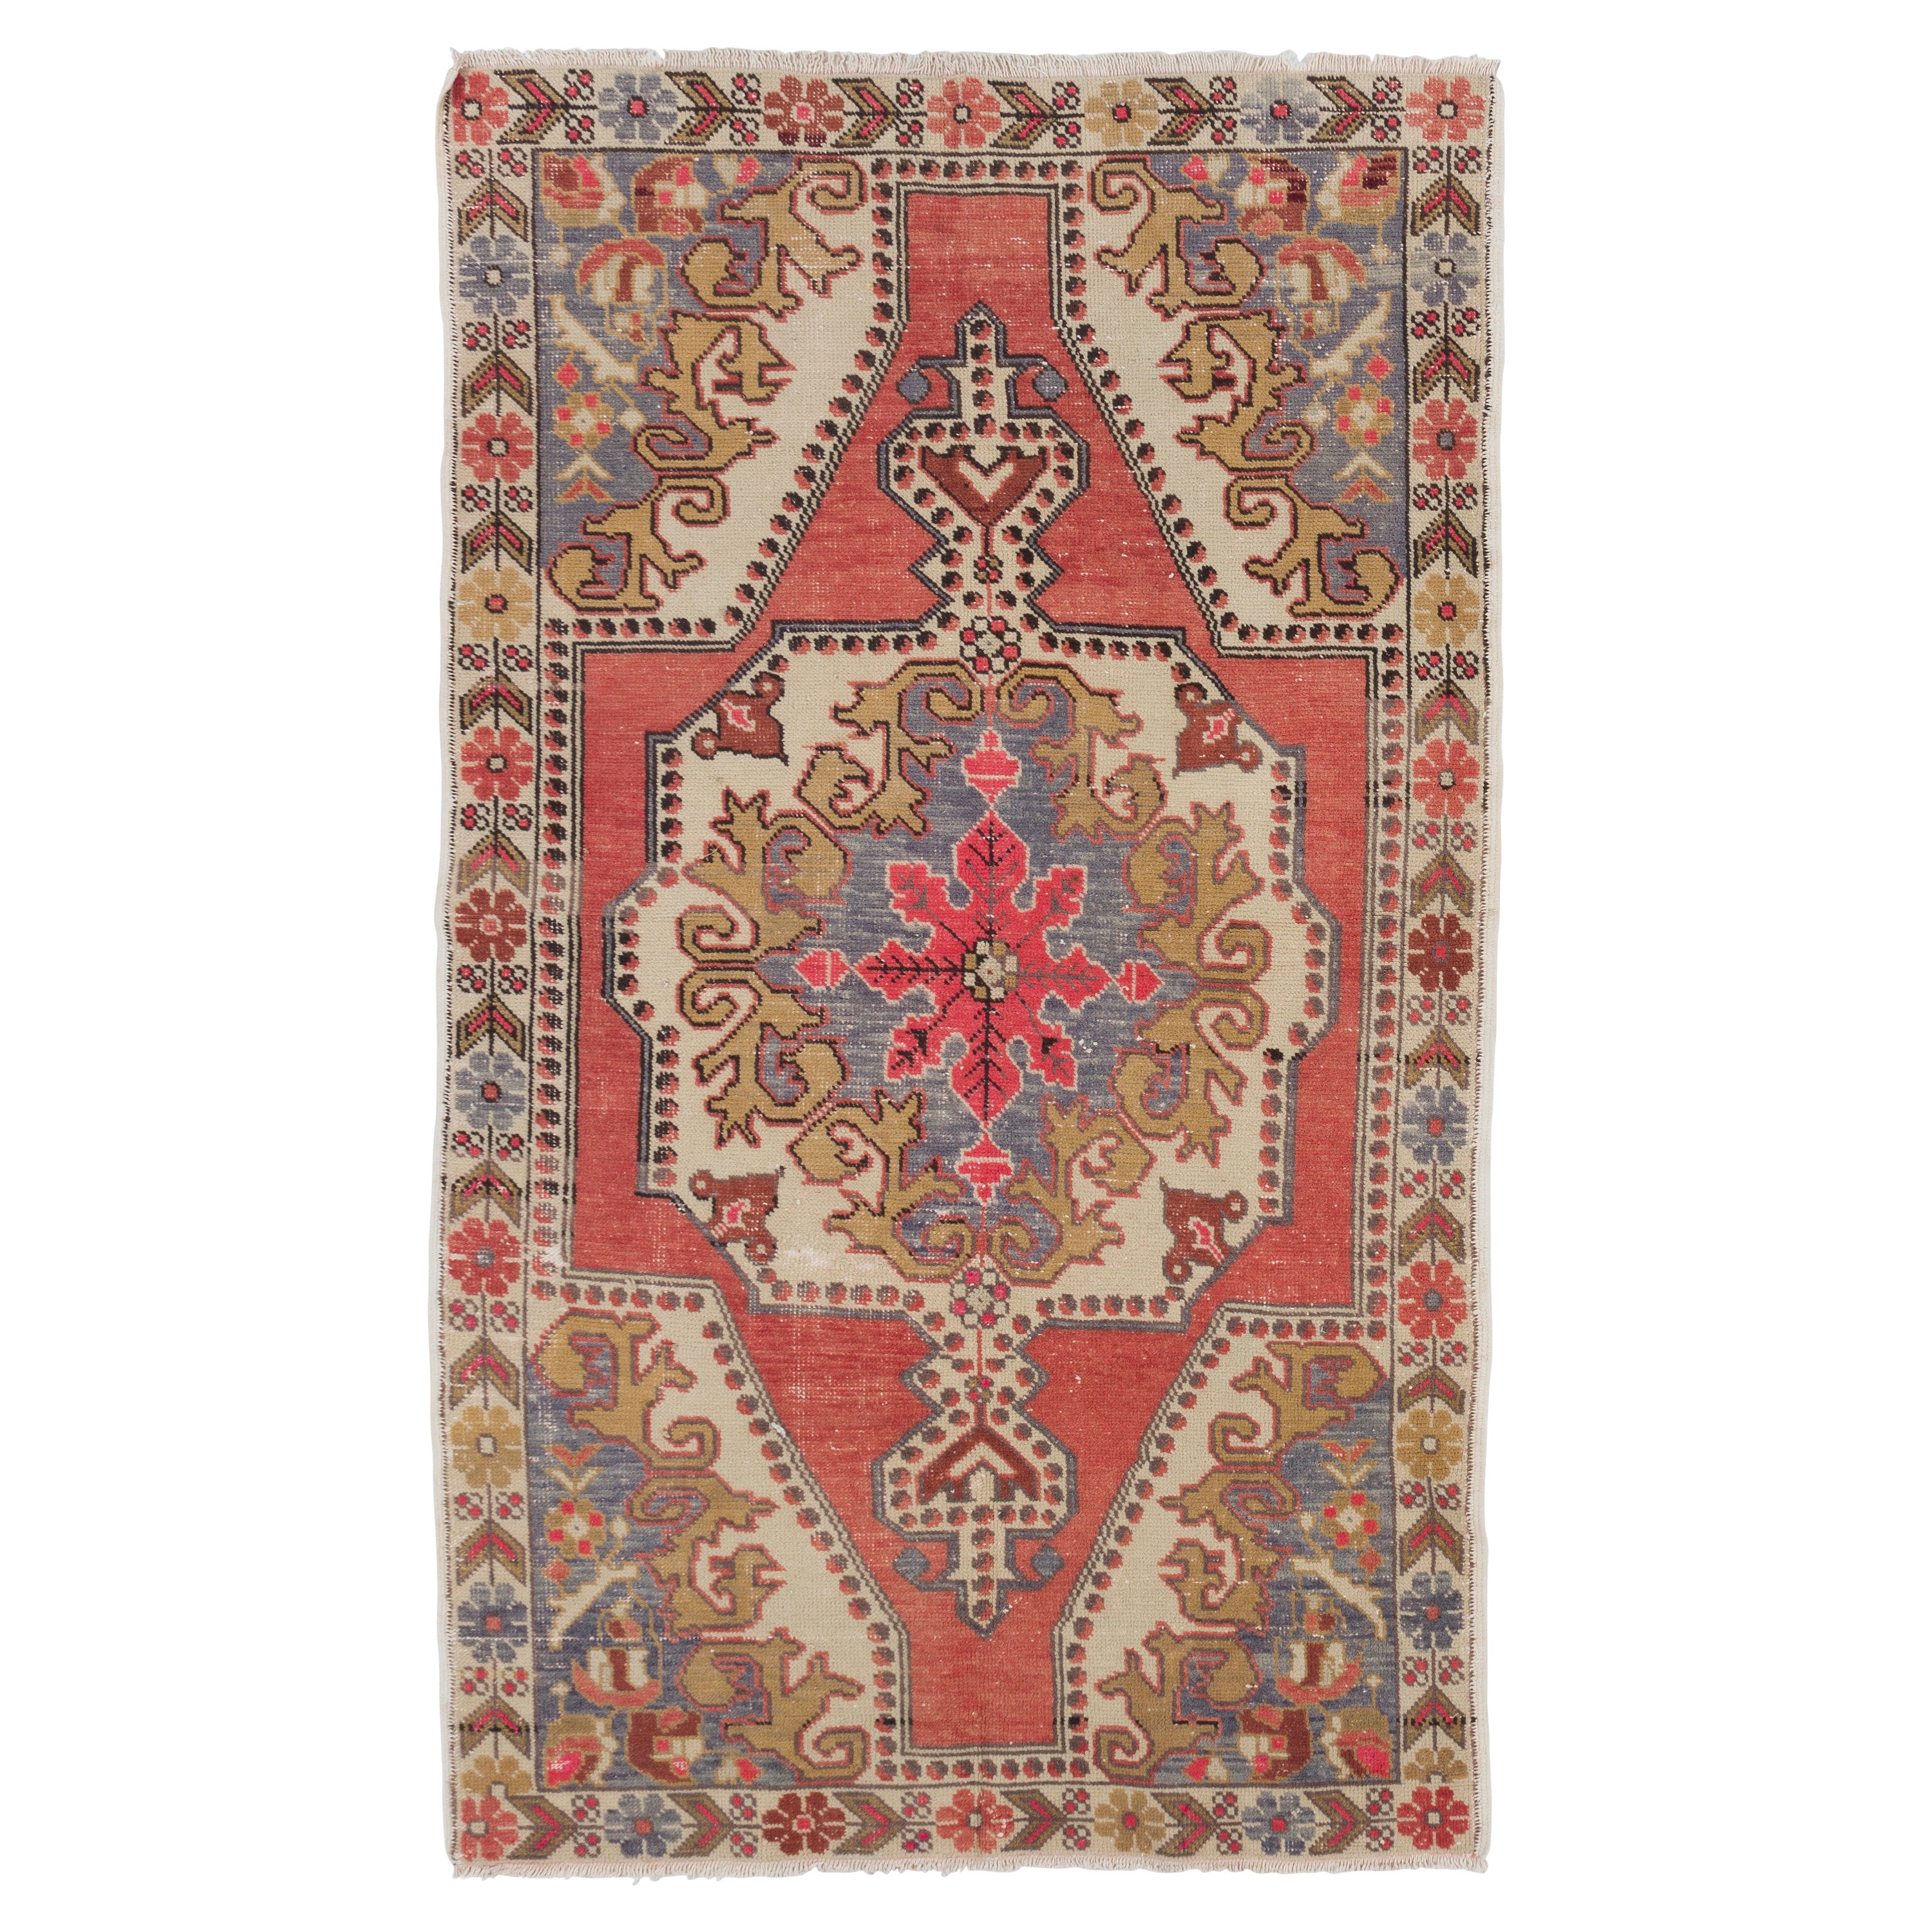 4.2x7.2 Ft Vintage Handmade Turkish Rug in Red with Medallion Design. Ca 1960 For Sale